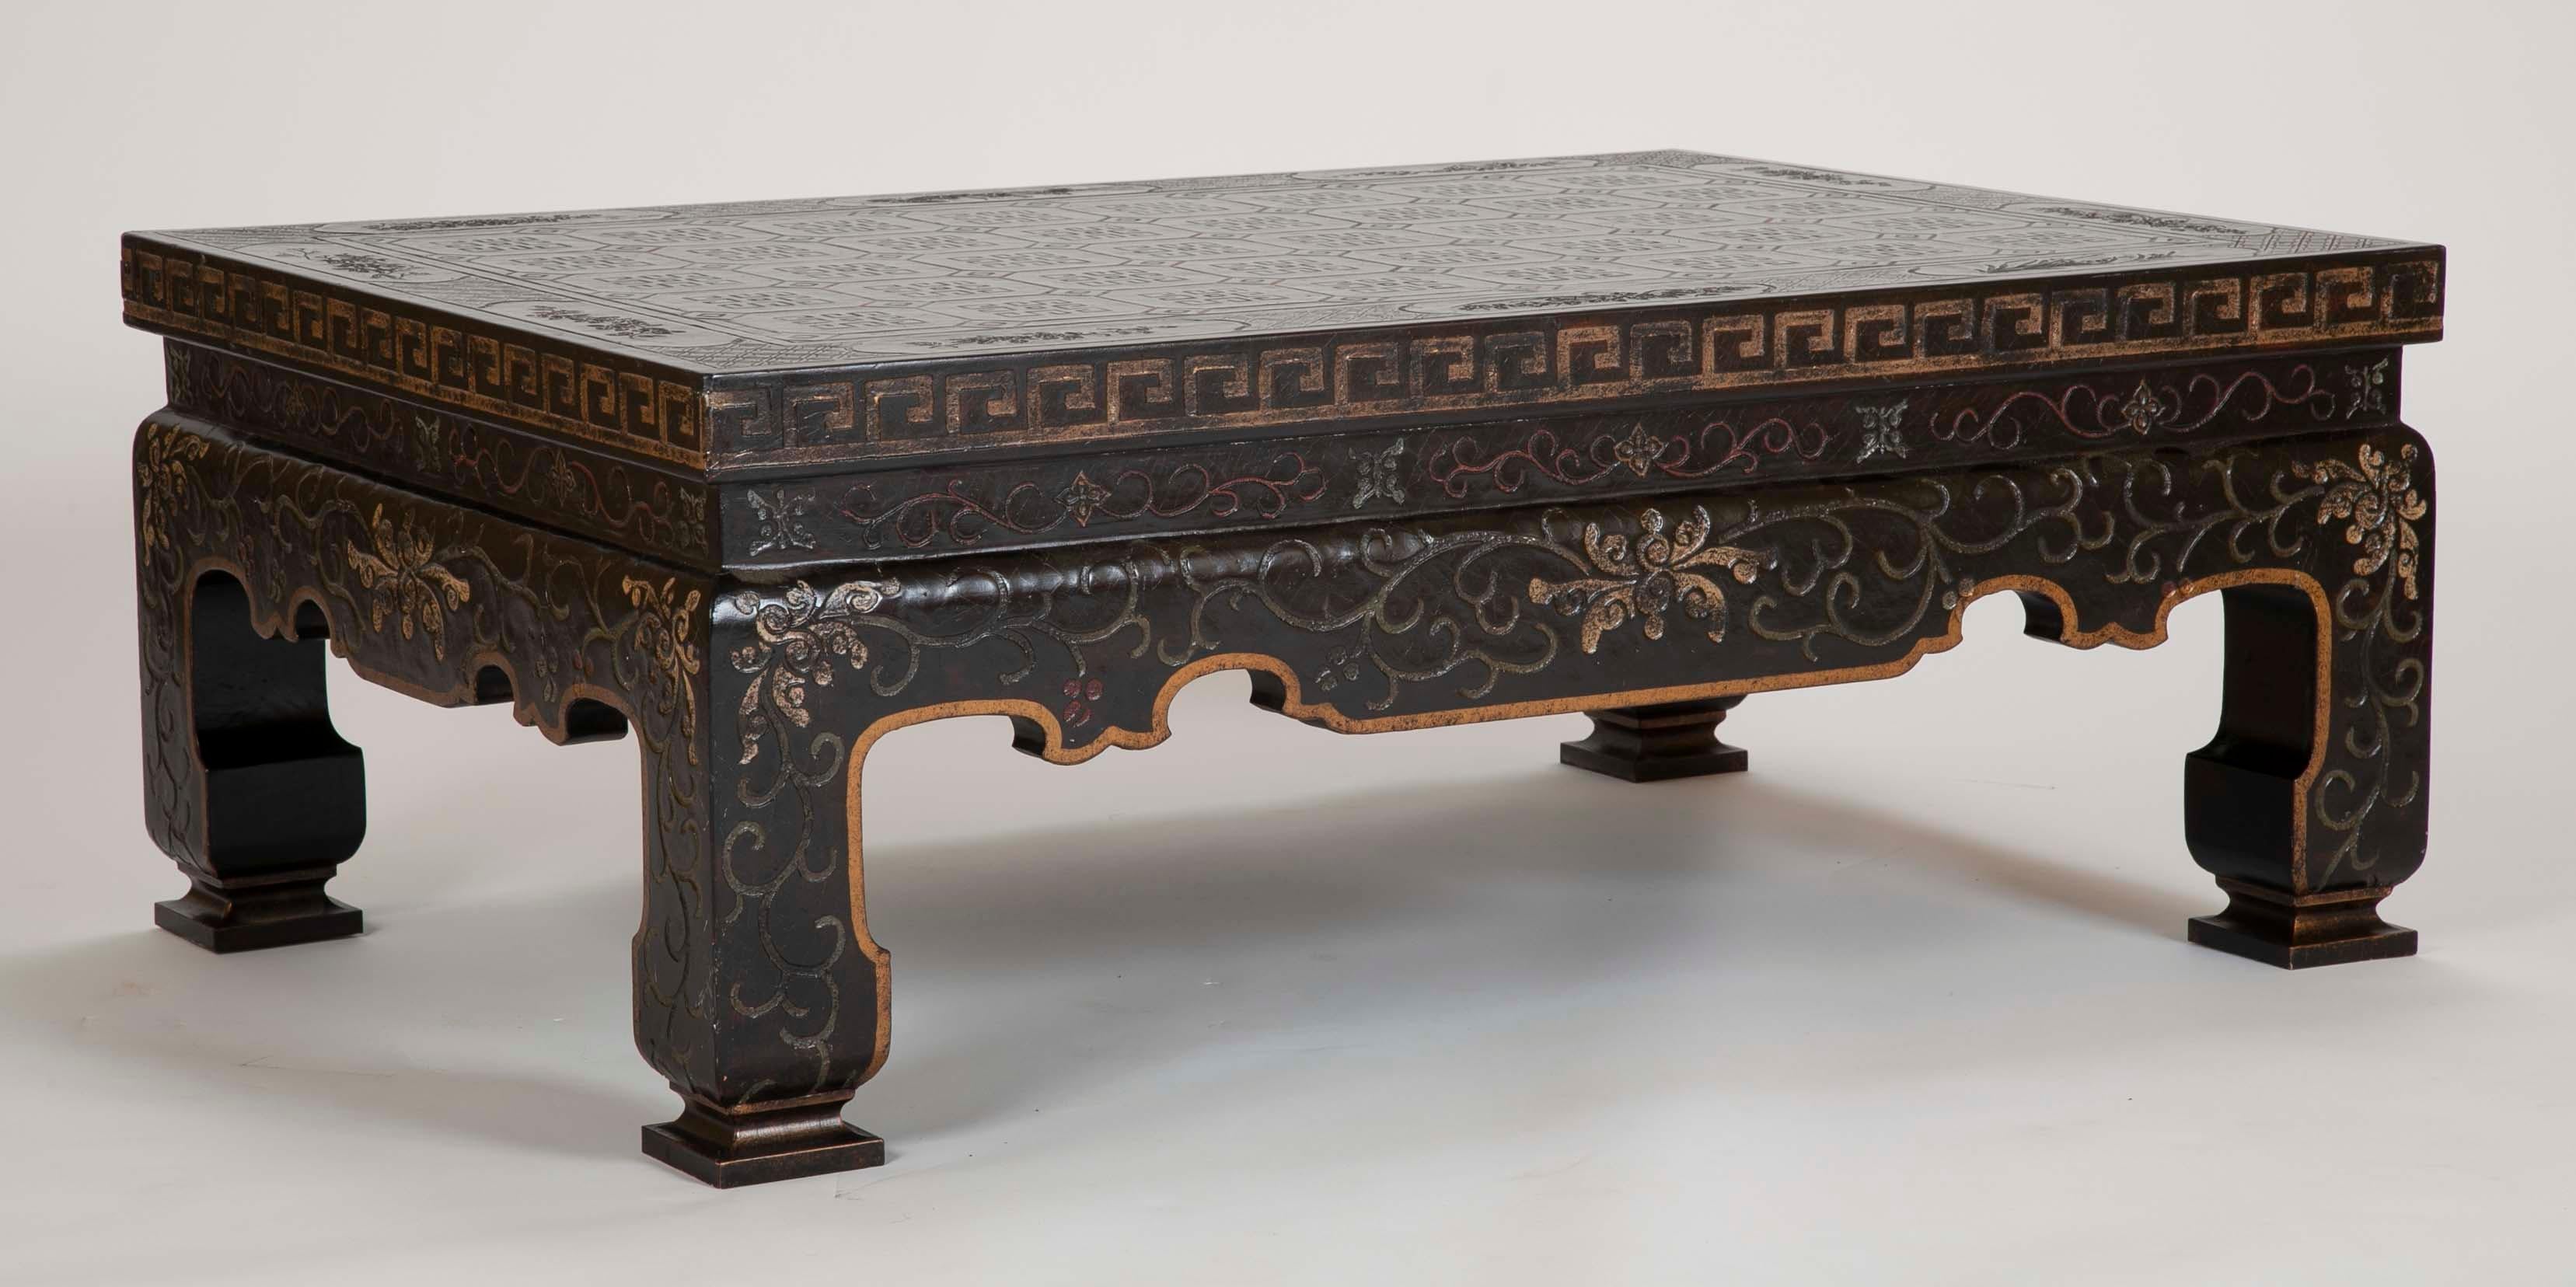 An elegant 1970s lacquered coffee or cocktail table with lovely incised black and gilt chinoiserie decoration. The solid, sculptural form of this table will make a stunning addition to any living room.